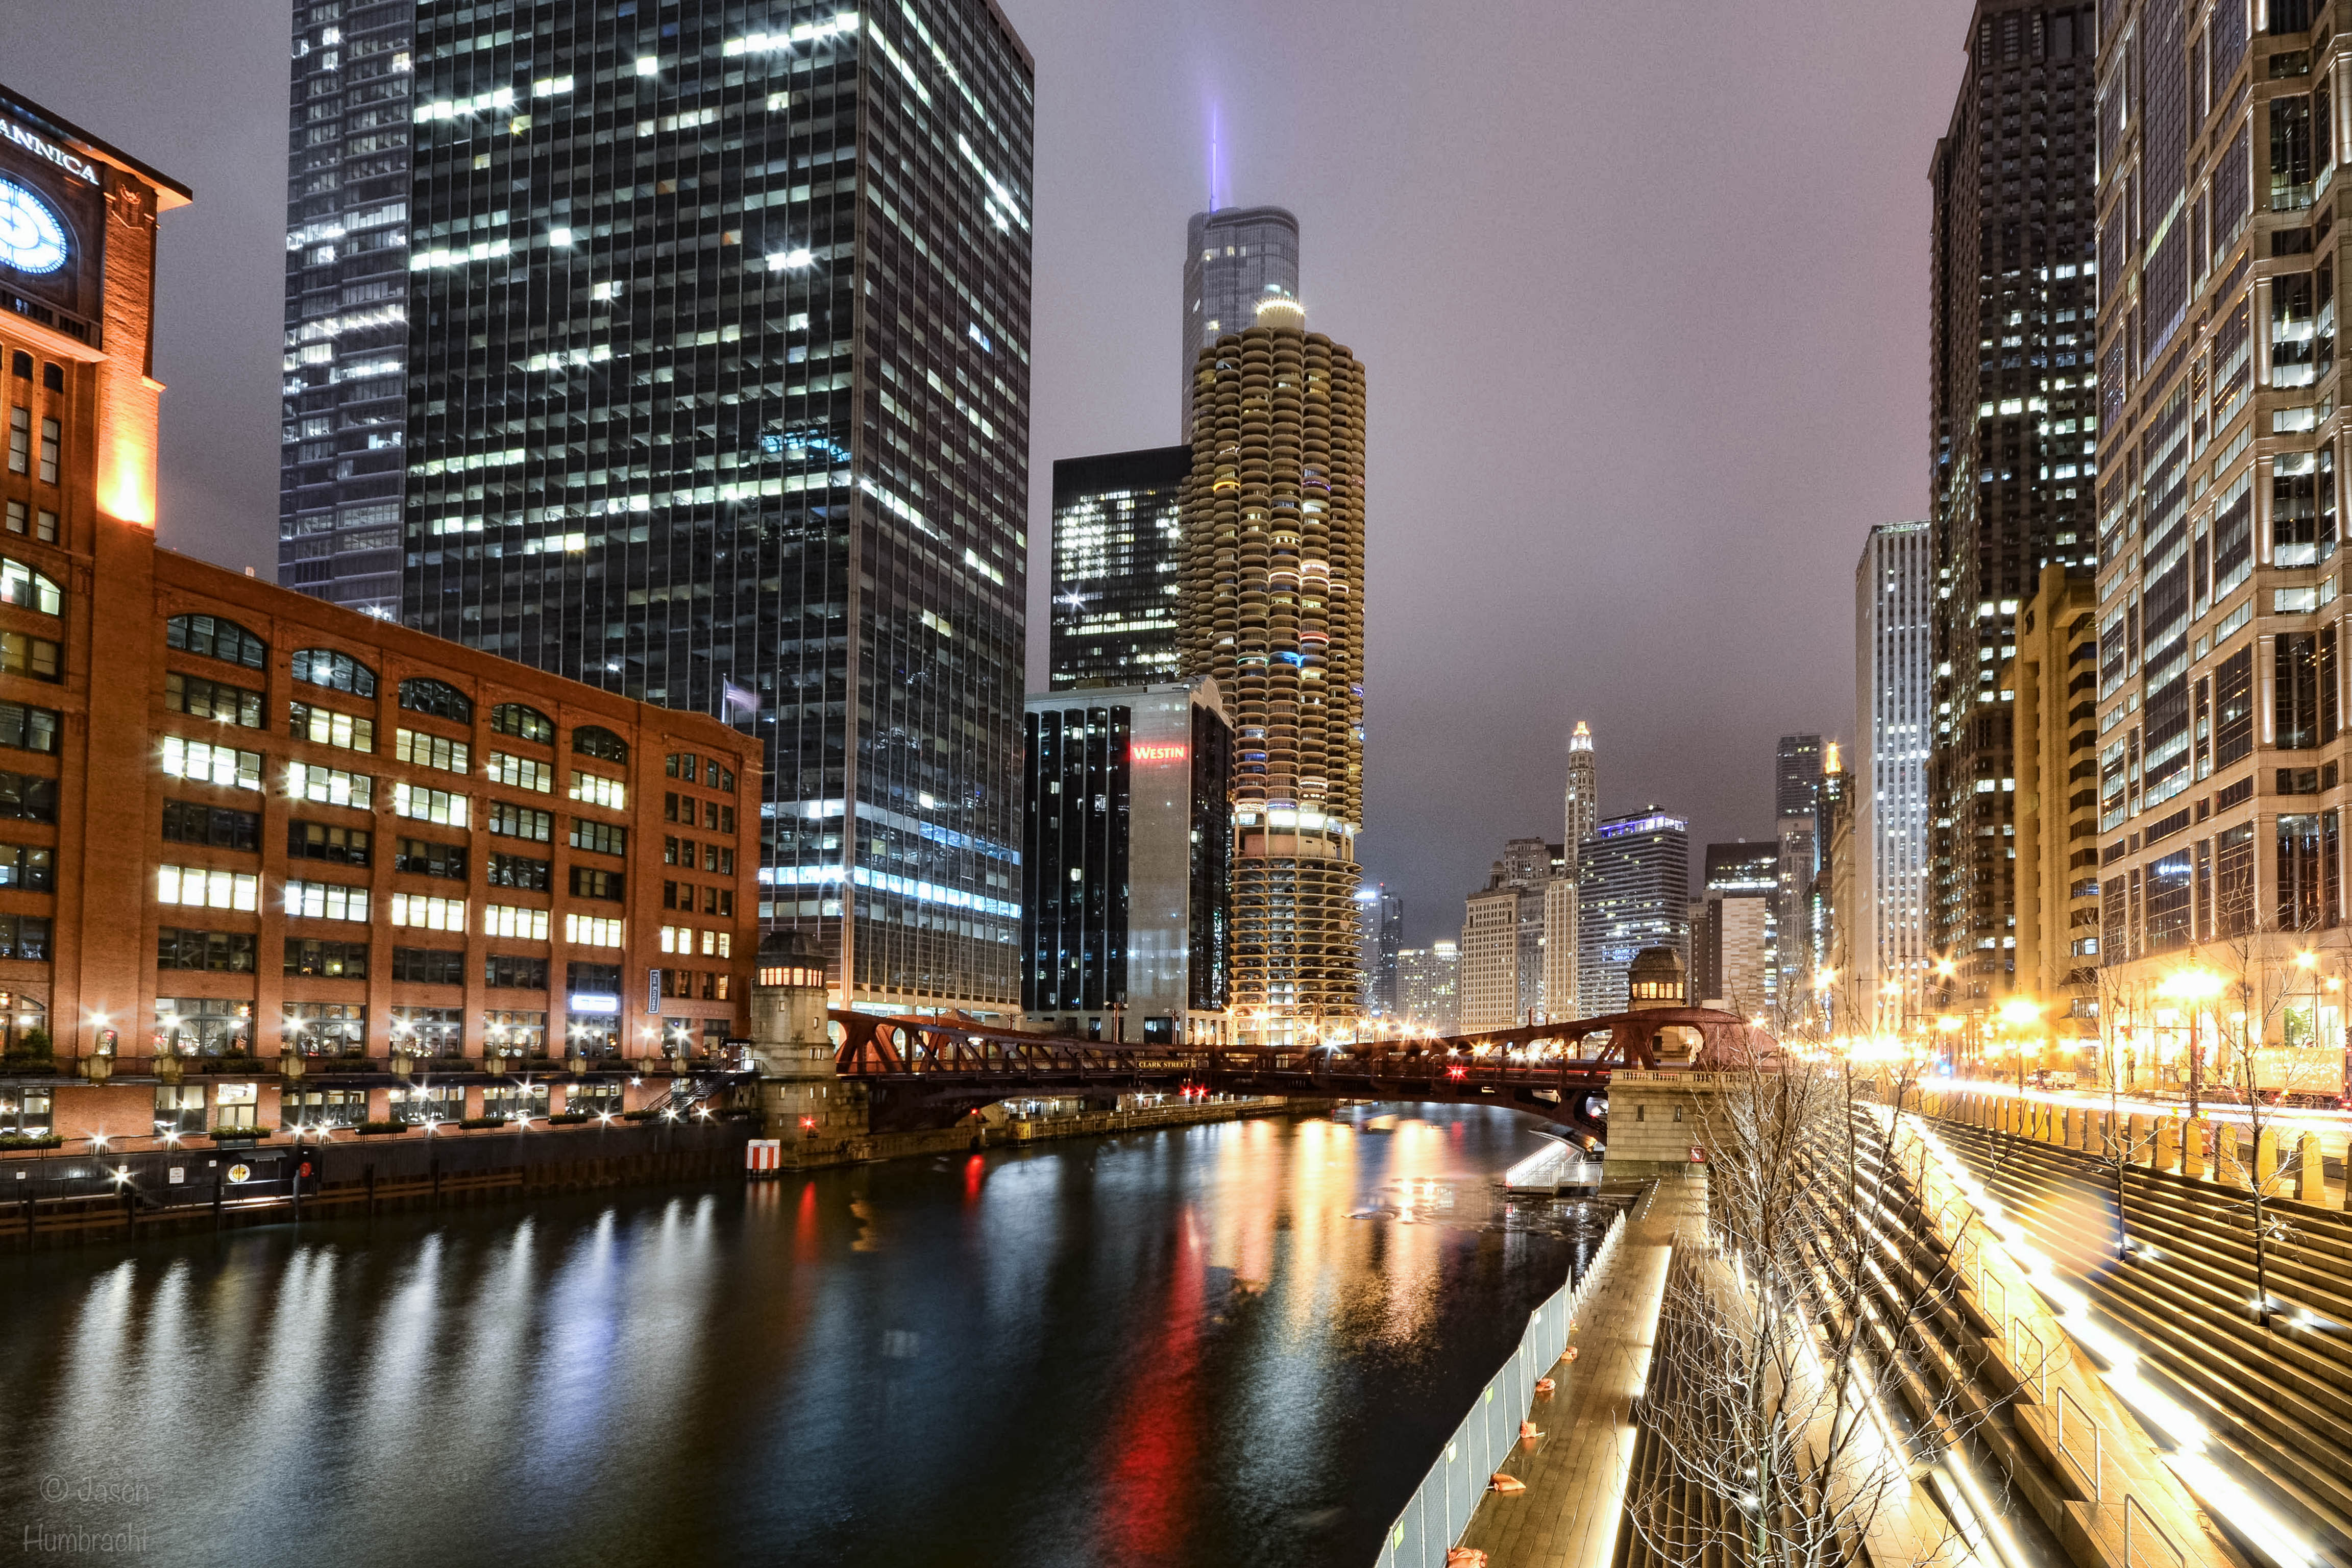 Chicago River | Chicago Architecture | Chicago At Night | Image By Indiana Architectural Photographer Jason Humbracht